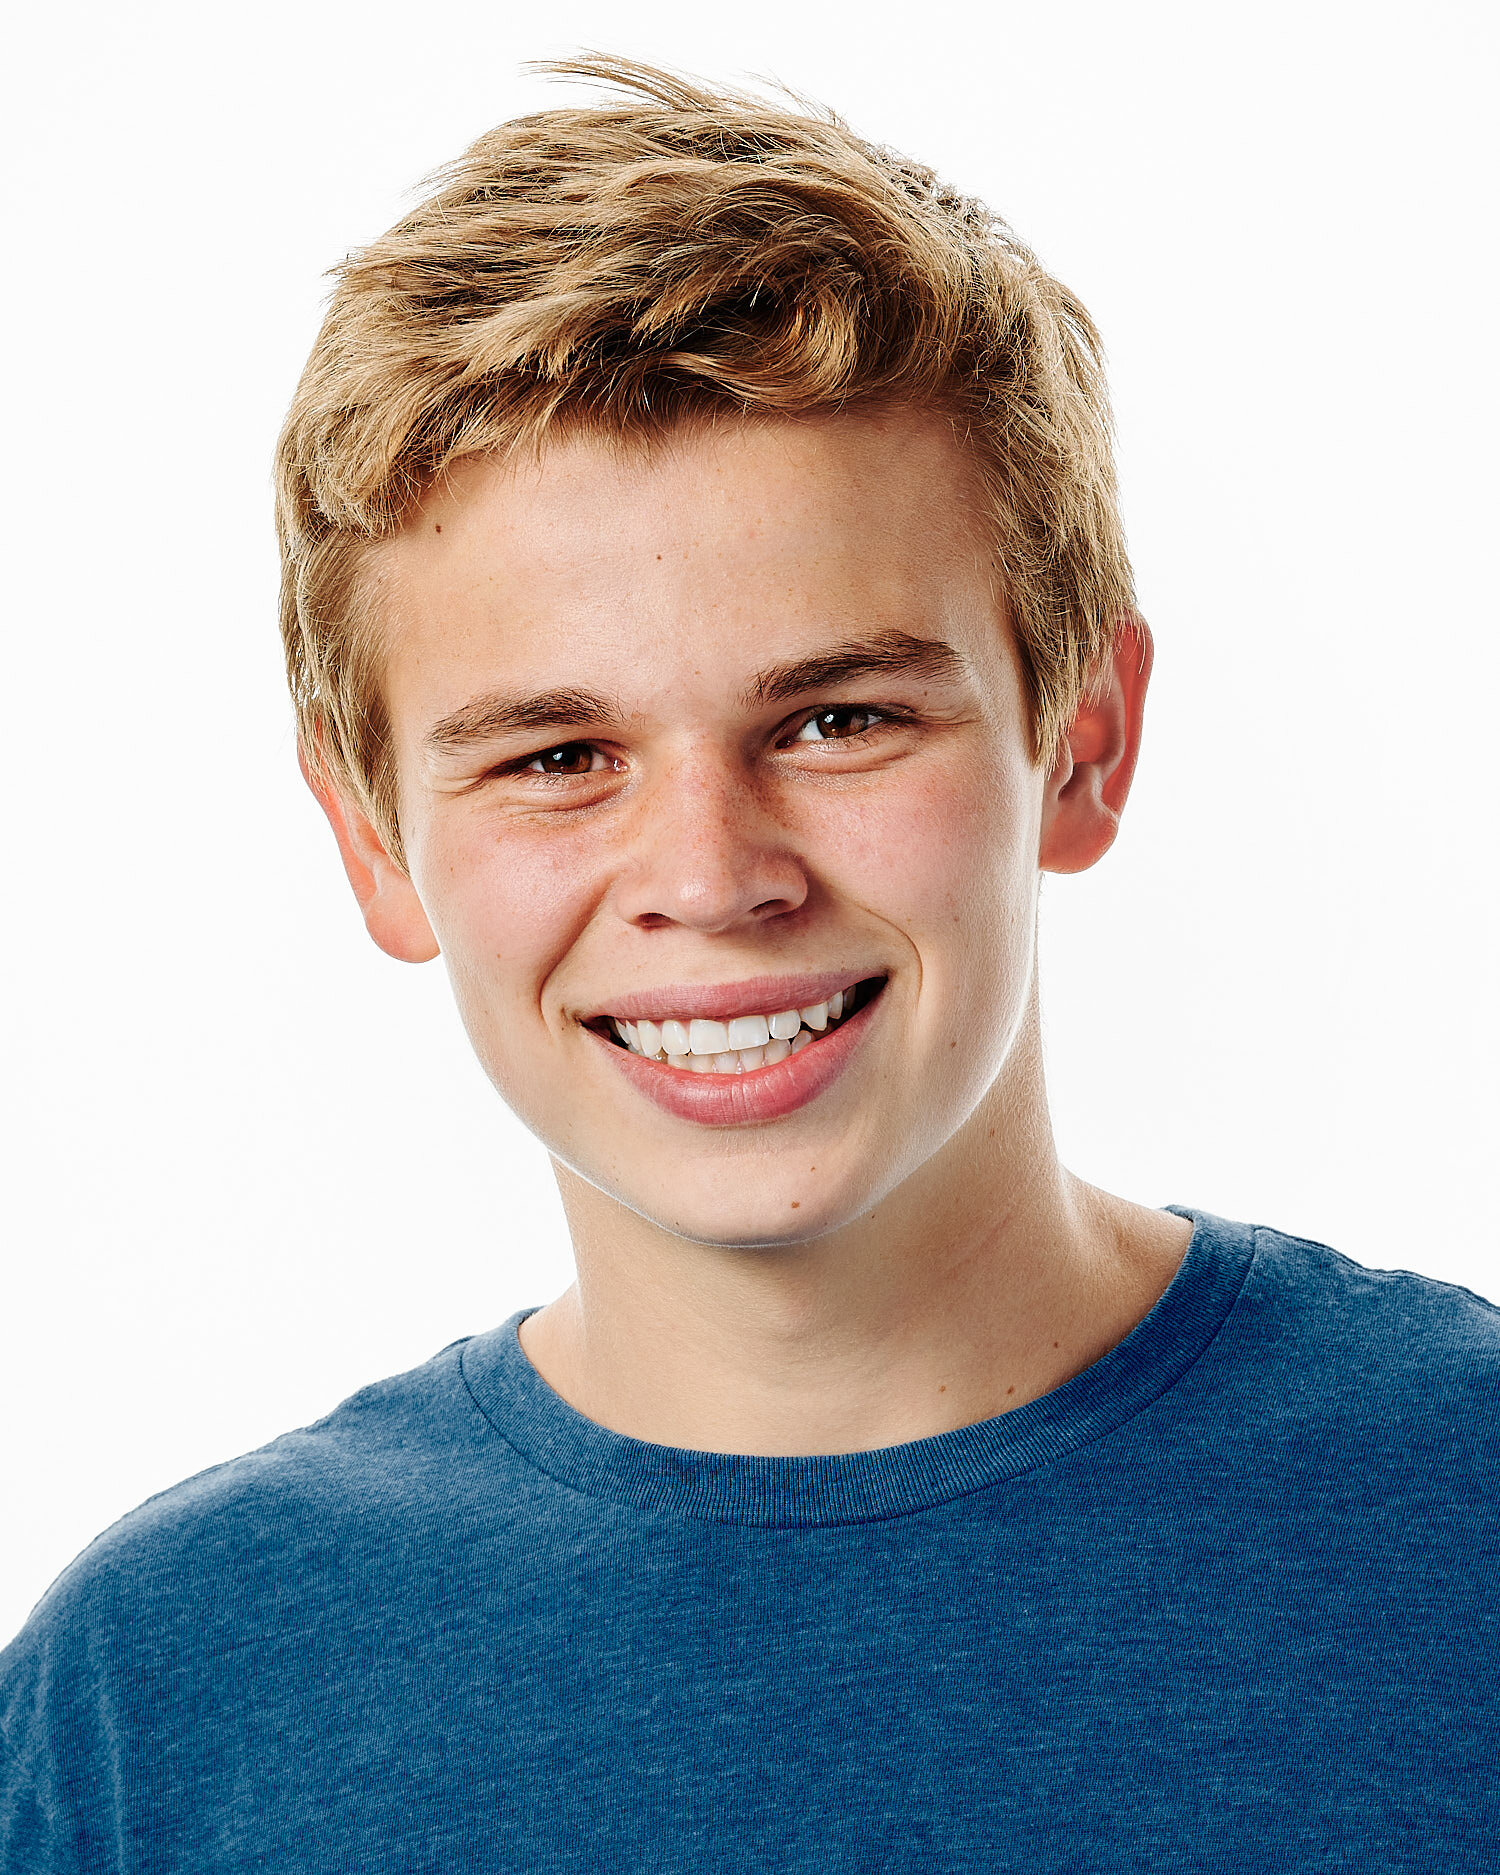  Max Peluso is posing for actor headshots against white background in a professional photography studio. He looks handsome and happy, he has blond hair and wears a blue t-shirt. 